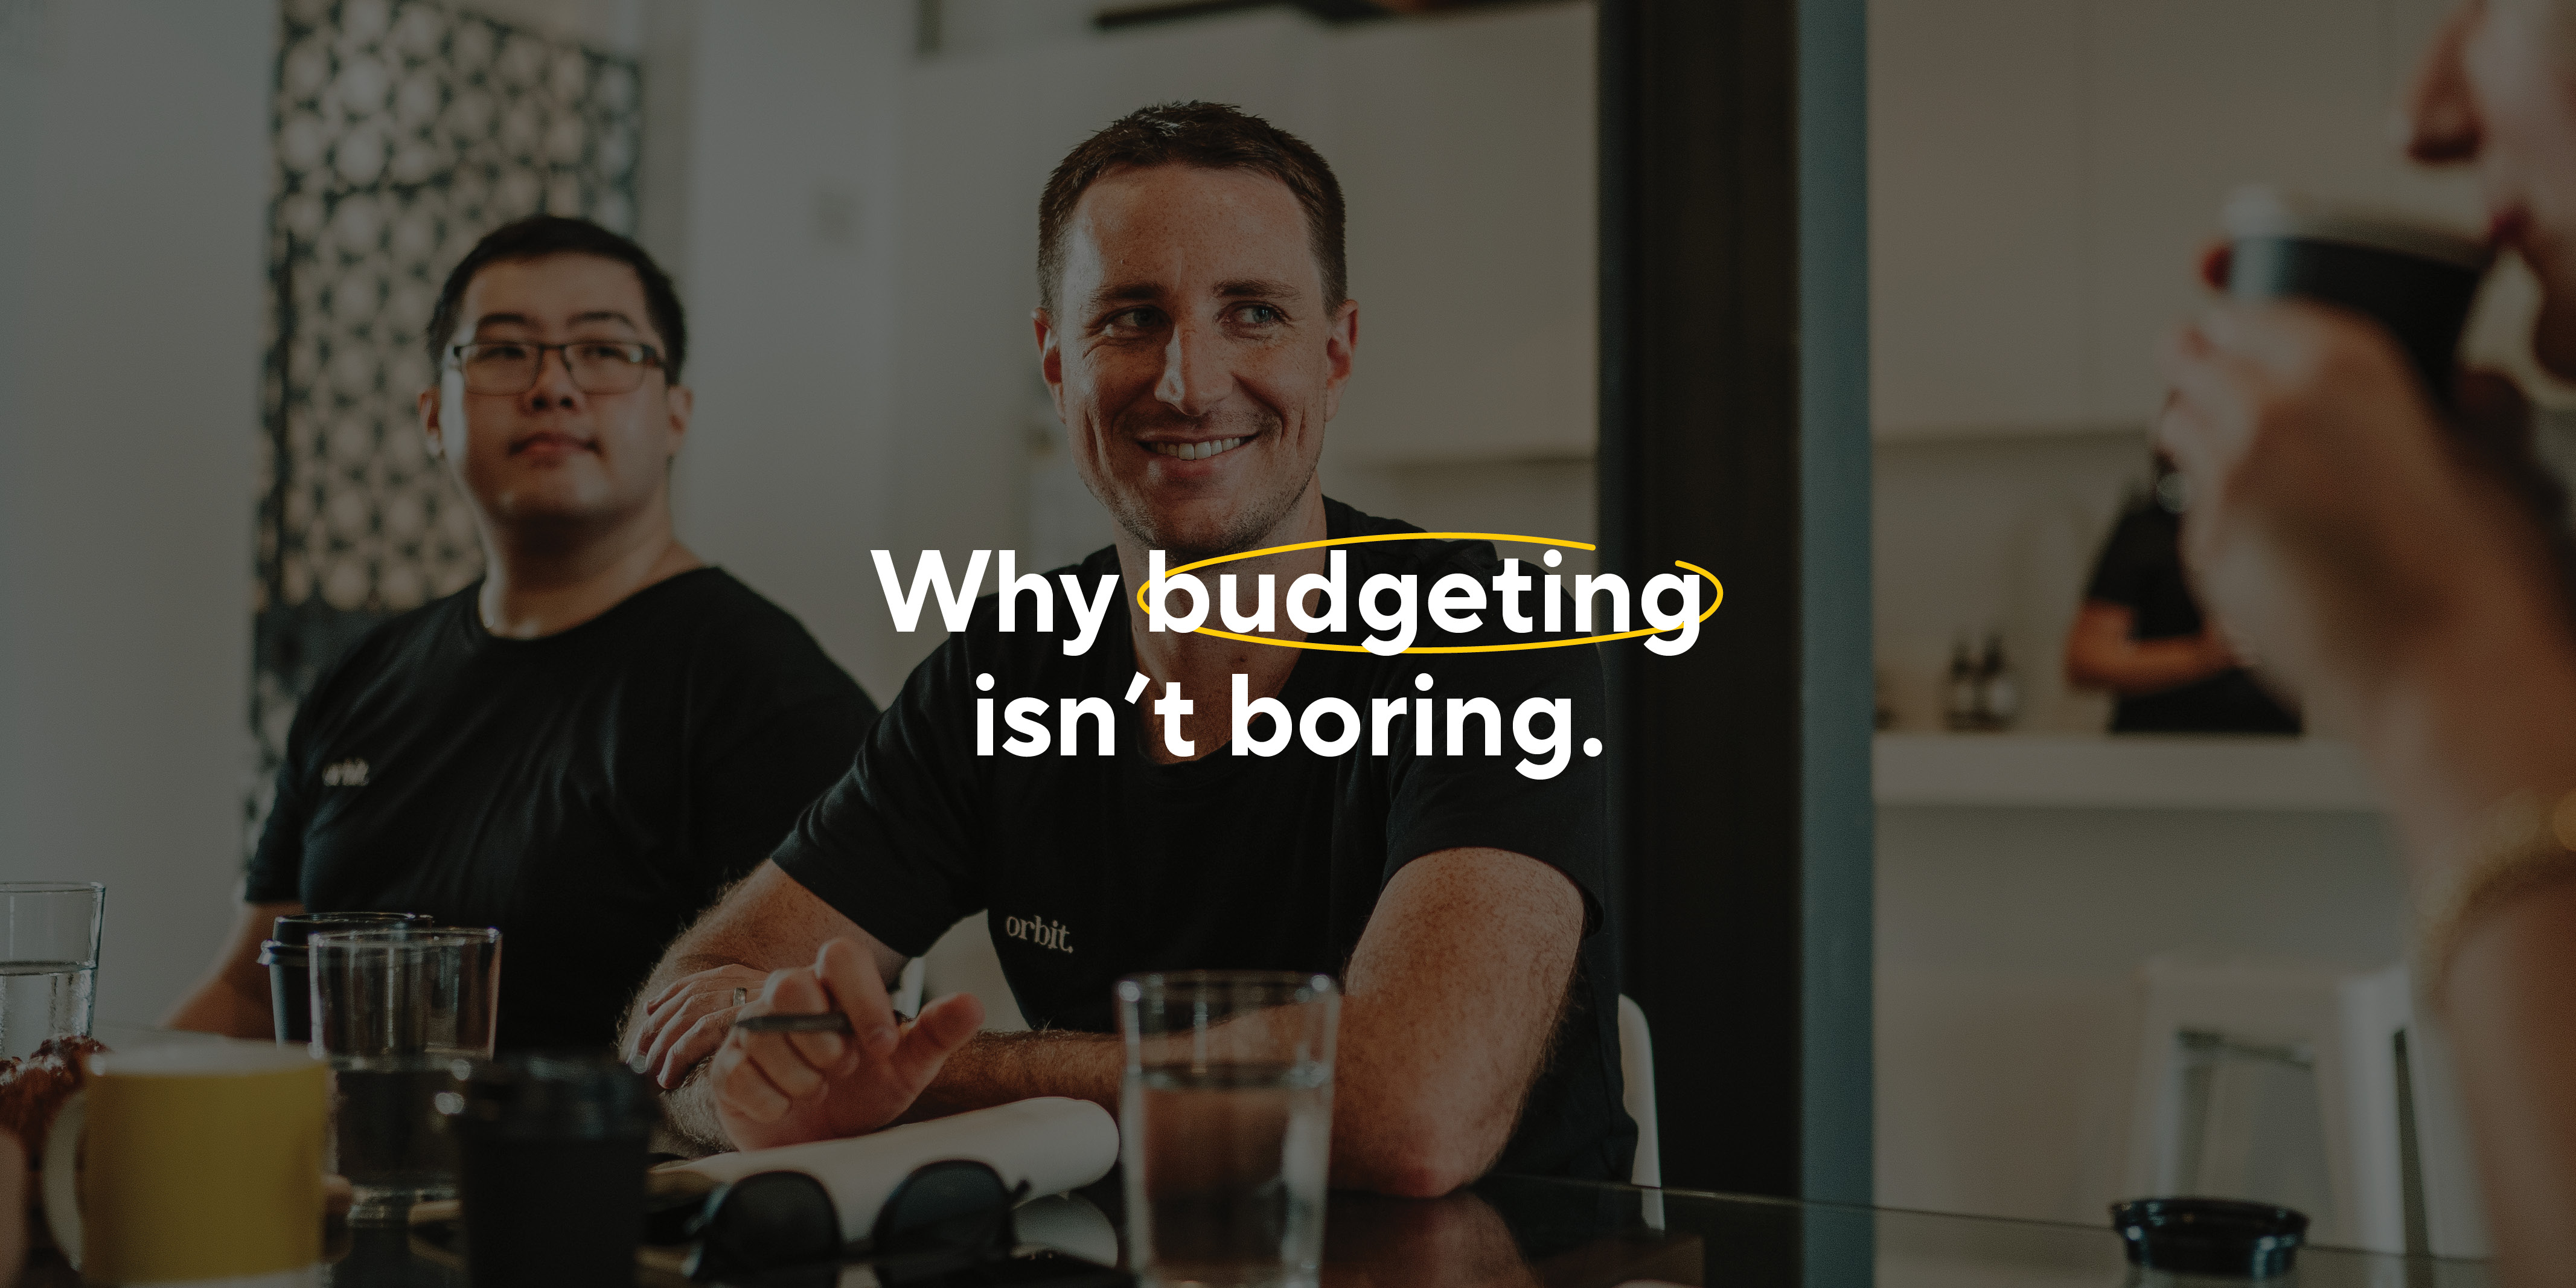 A Small Business Owners Guide To Budgeting13